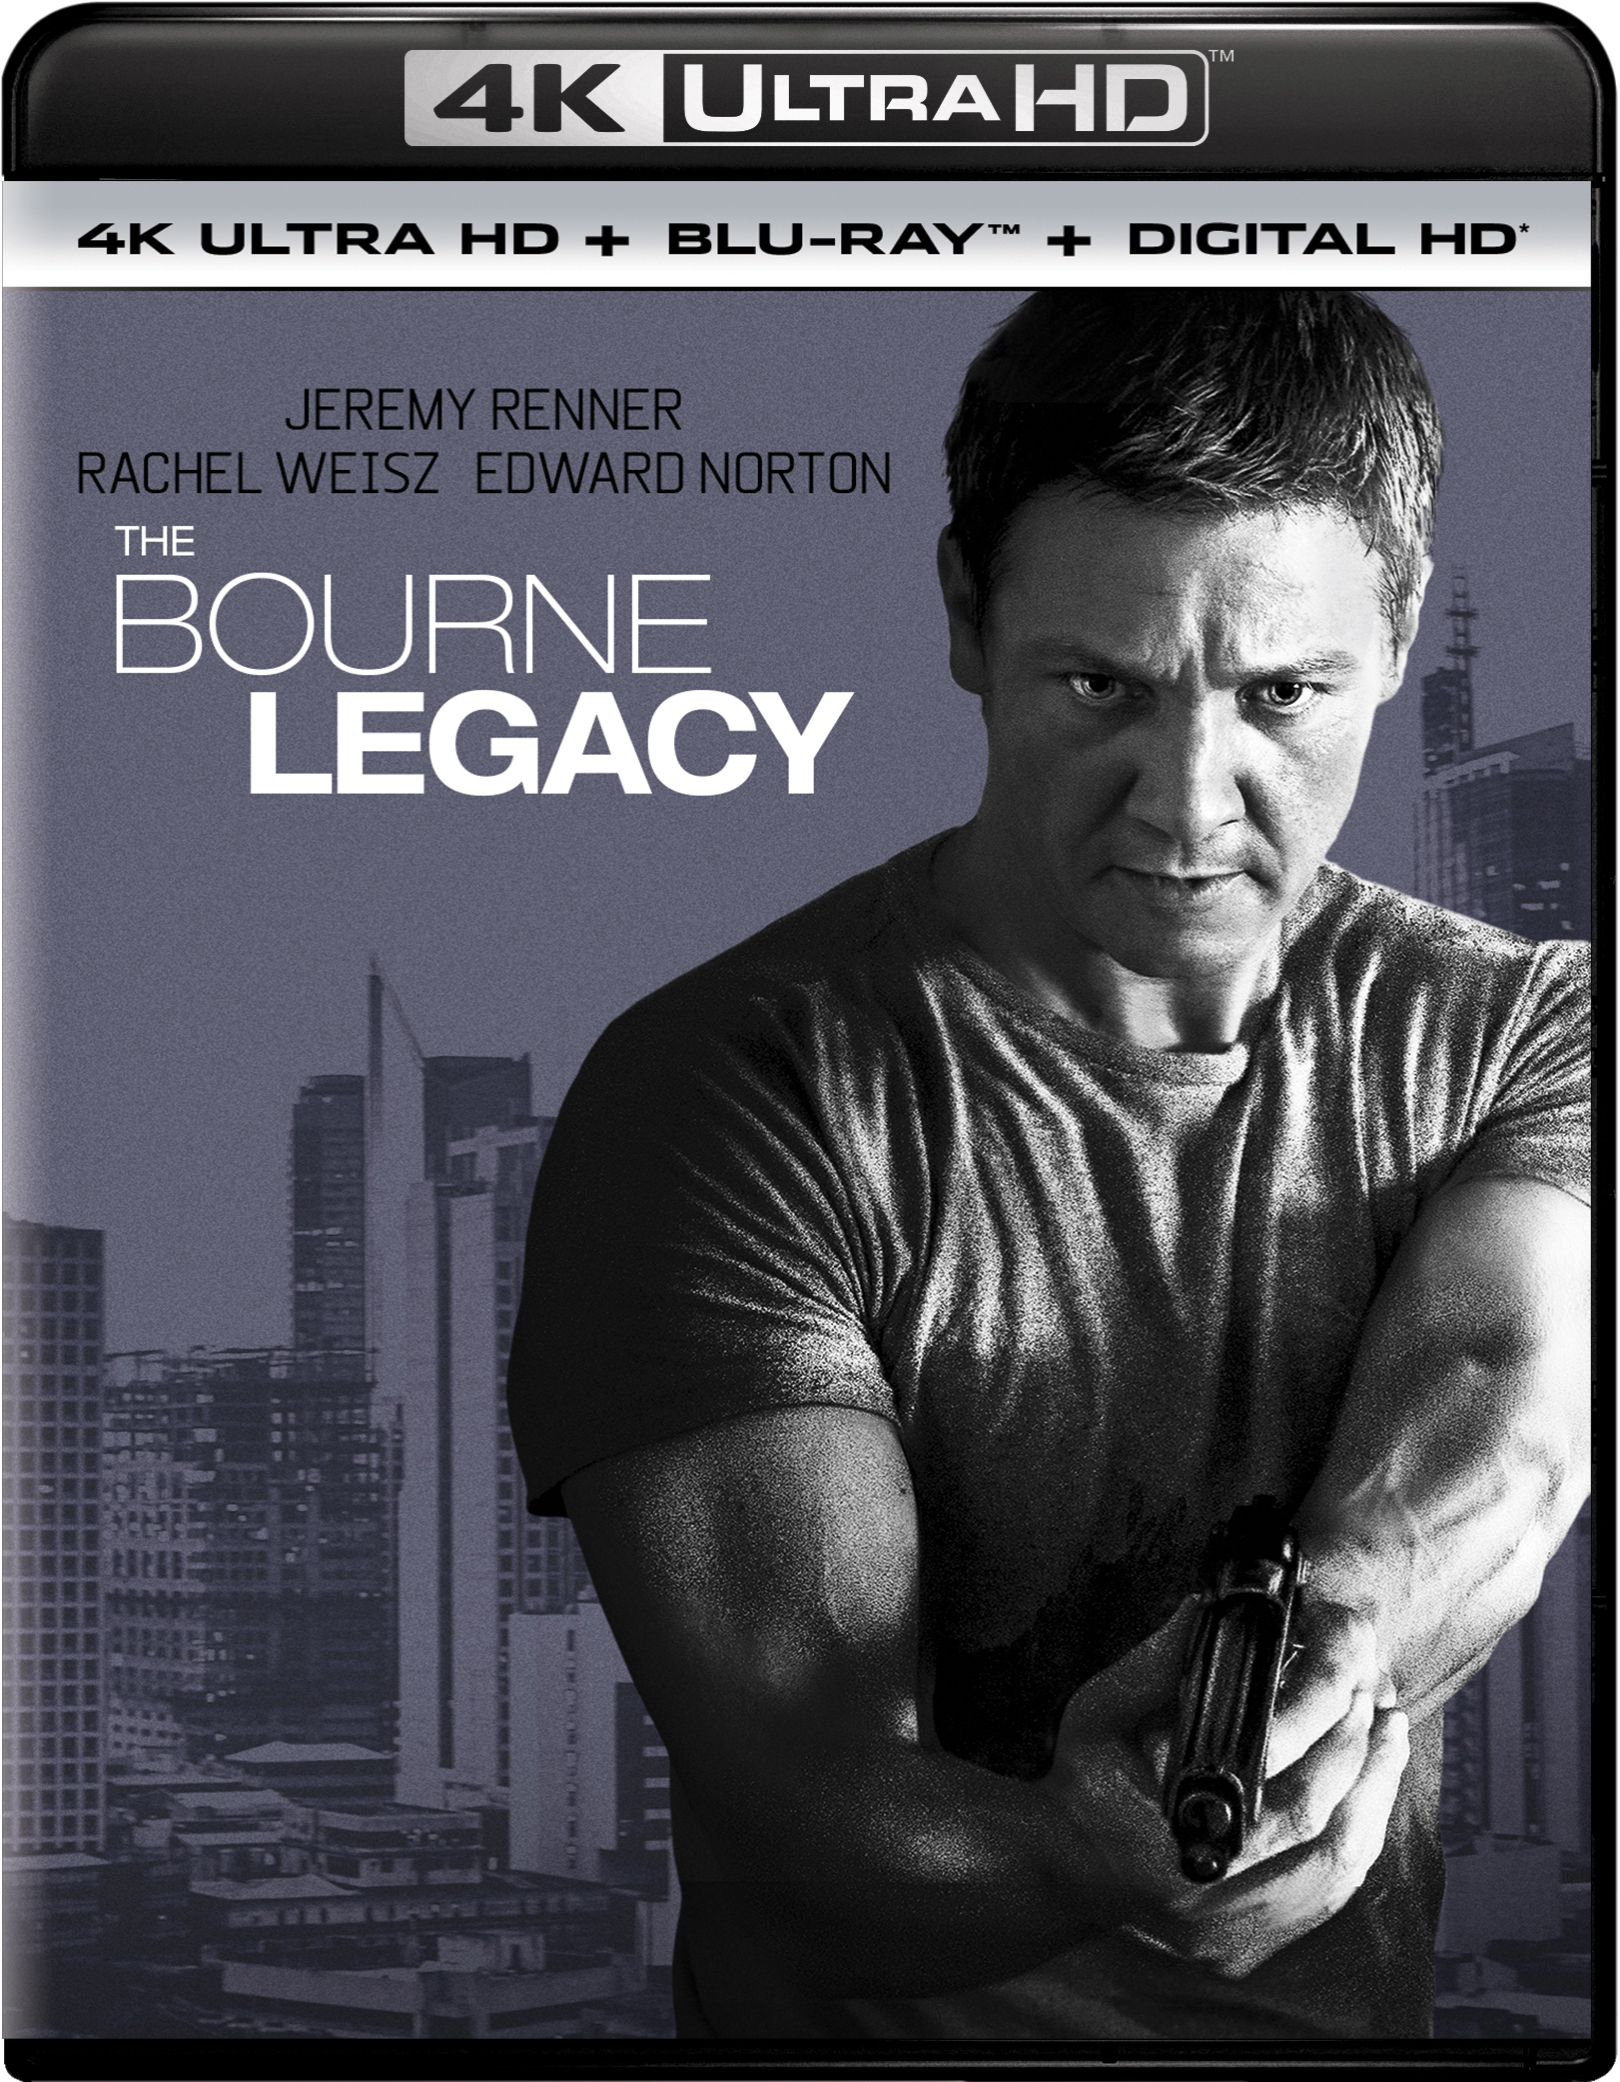 The Bourne Legacy (4K Ultra HD) - UHD [ 2012 ]  - Thriller Movies On 4K Ultra HD Blu-ray - Movies On GRUV